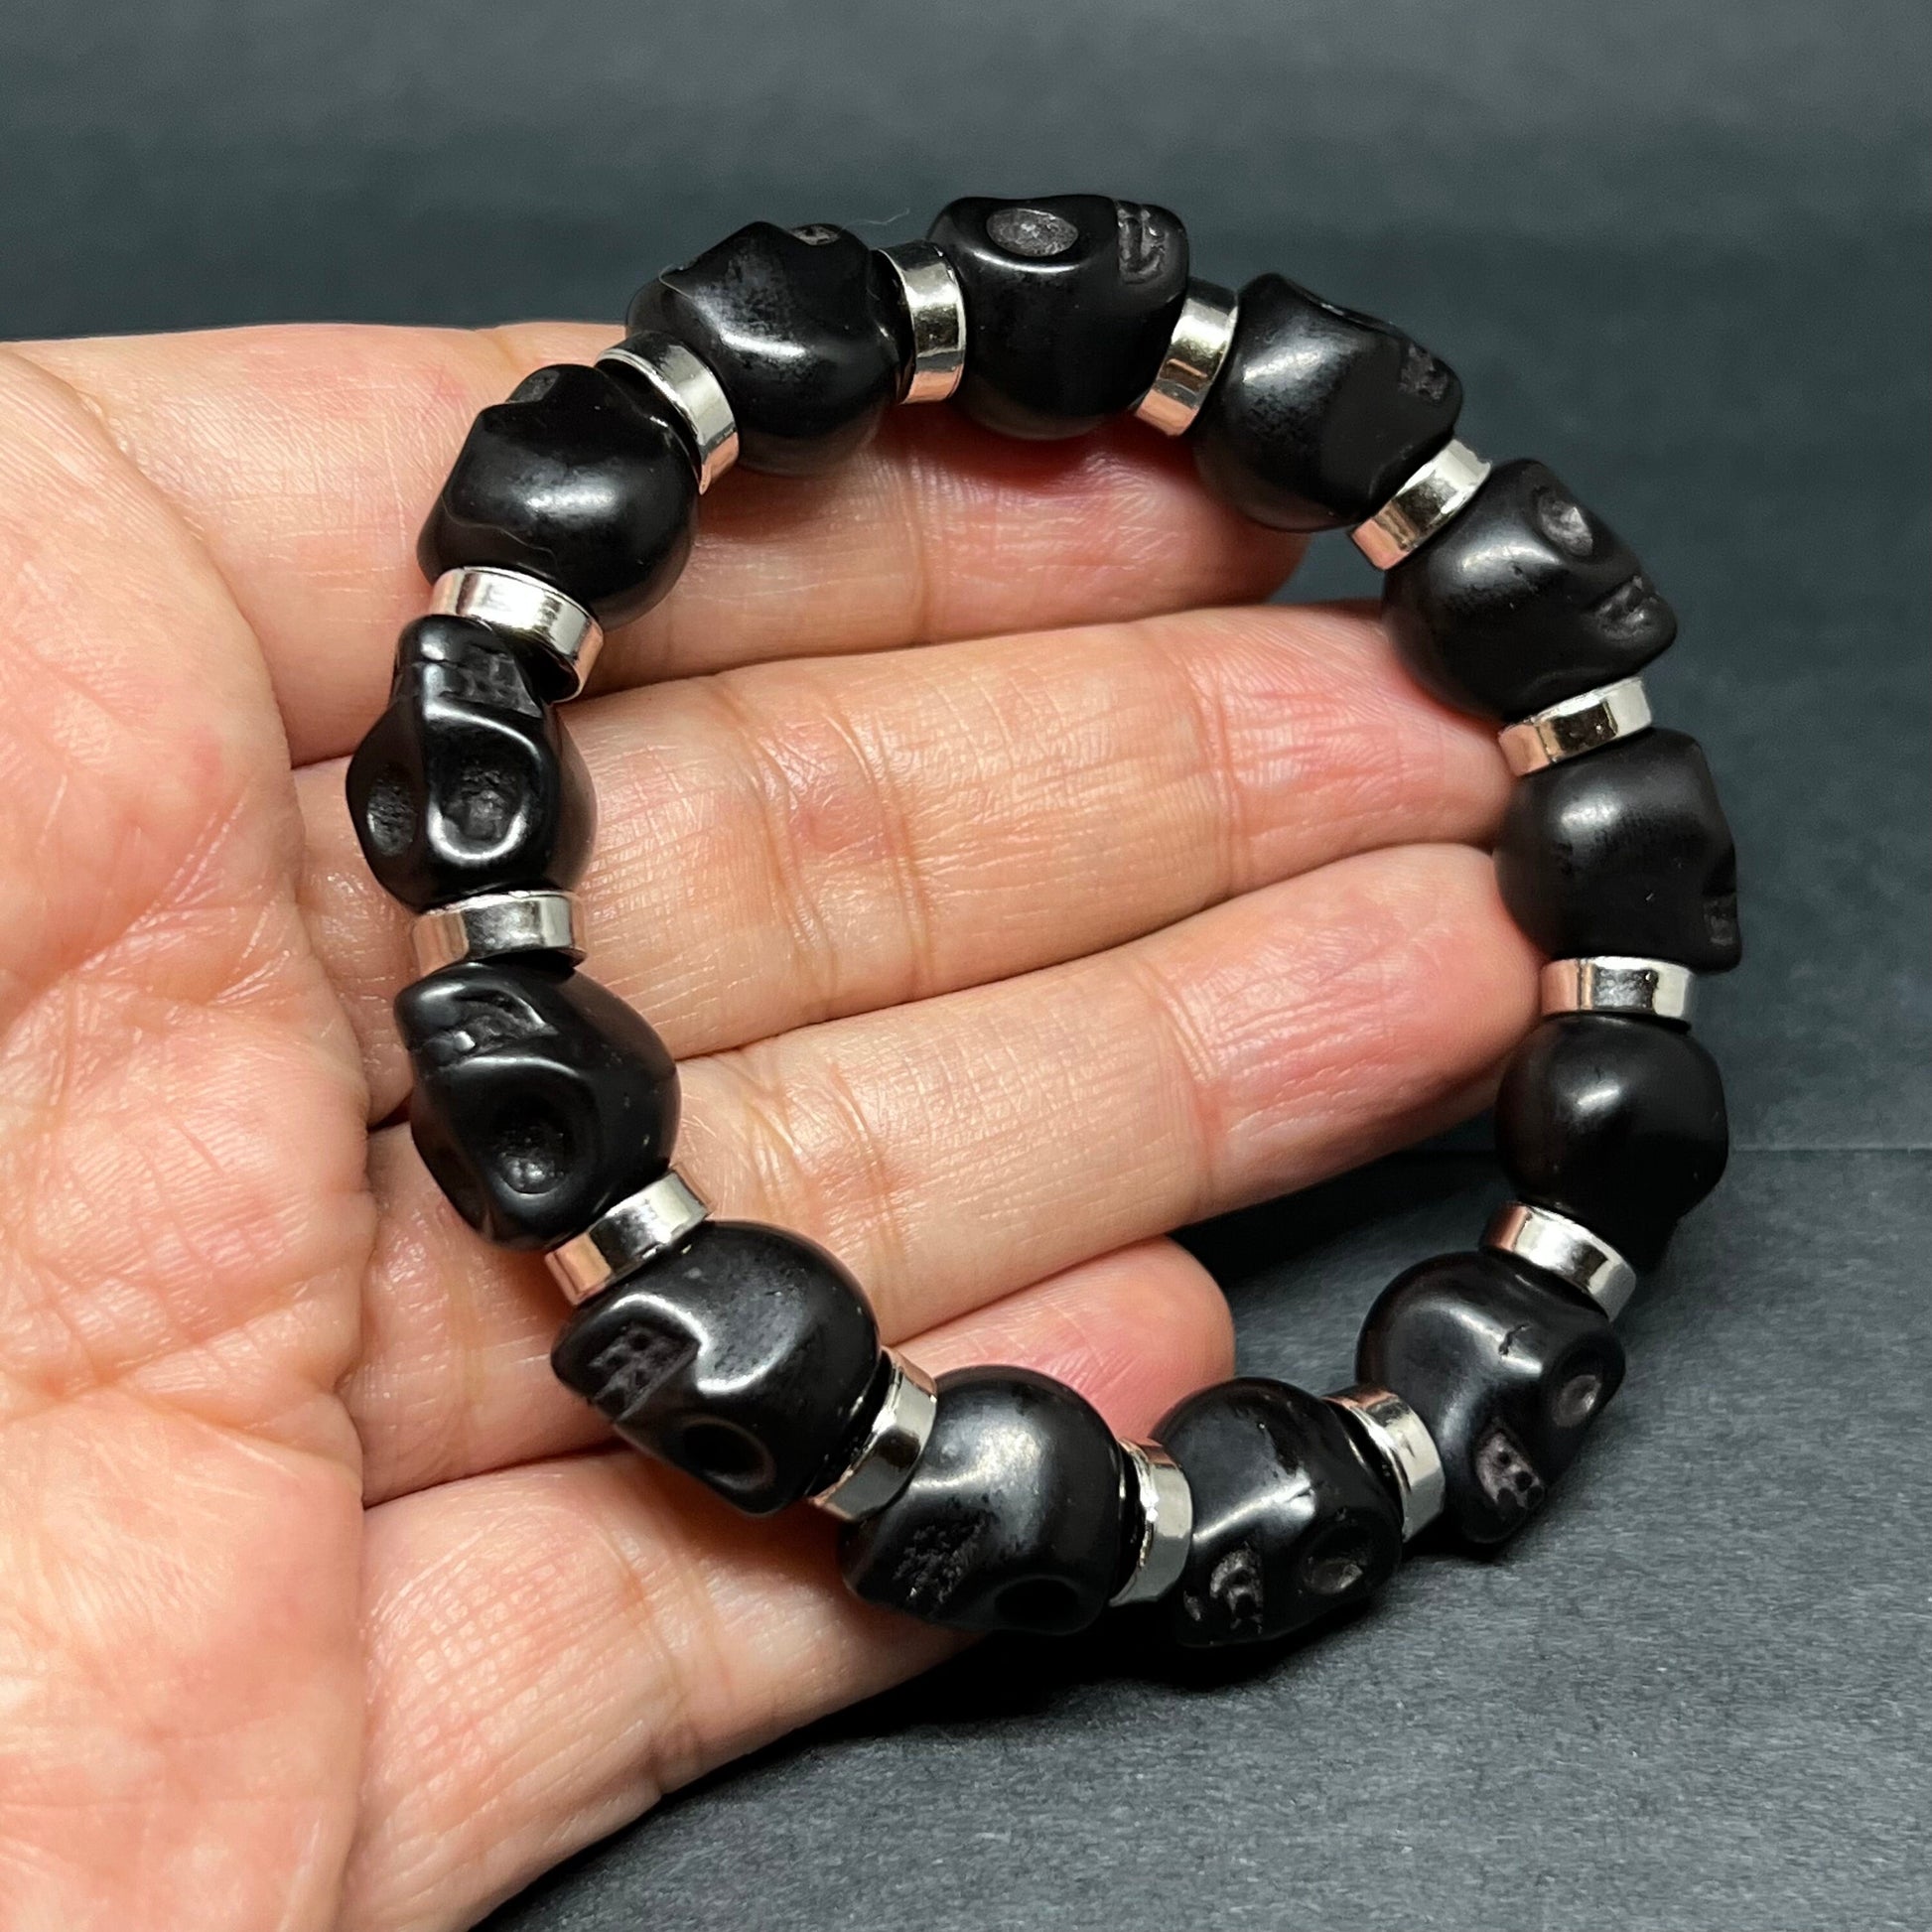 Black Skull Beaded Wristband Elastic Bracelet with Metallic Silver Steel Tone Beads Man Jewelry Men's Casual Fashion Day of the Dead Gift